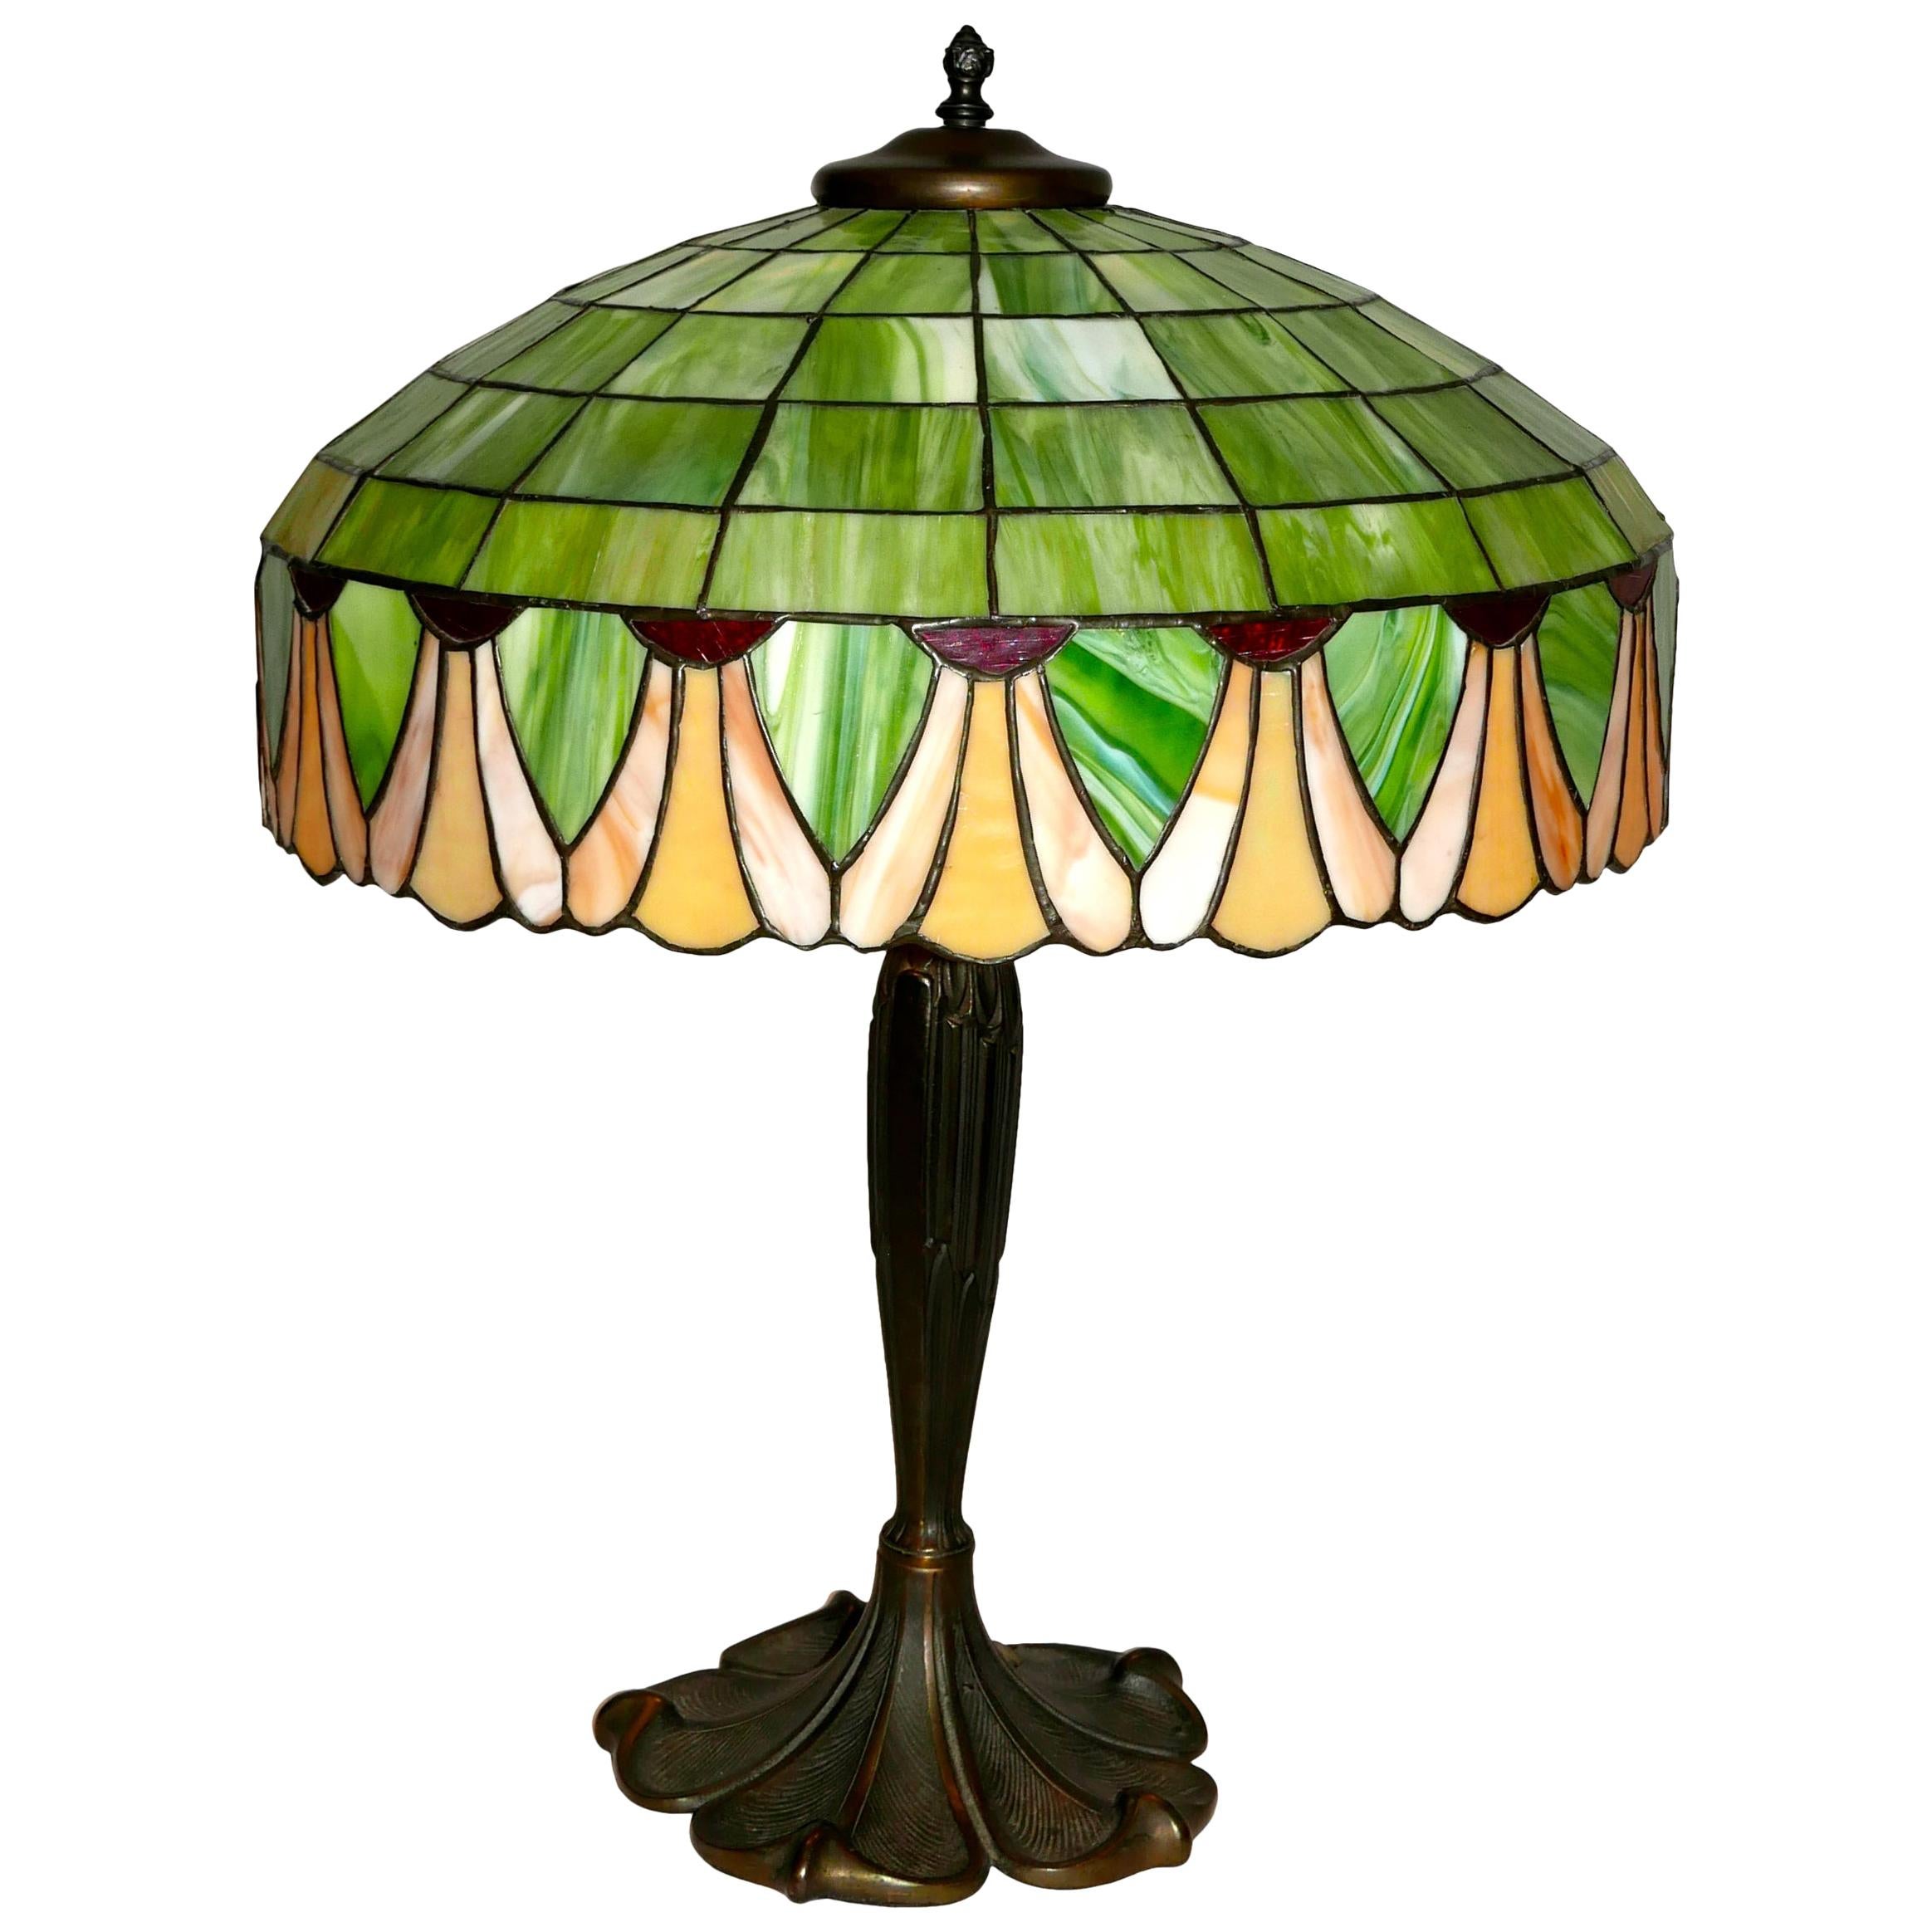 Art Nouveau Leaded Glass Table Lamp by Lamb Bros. & Greene, Early 20th Century